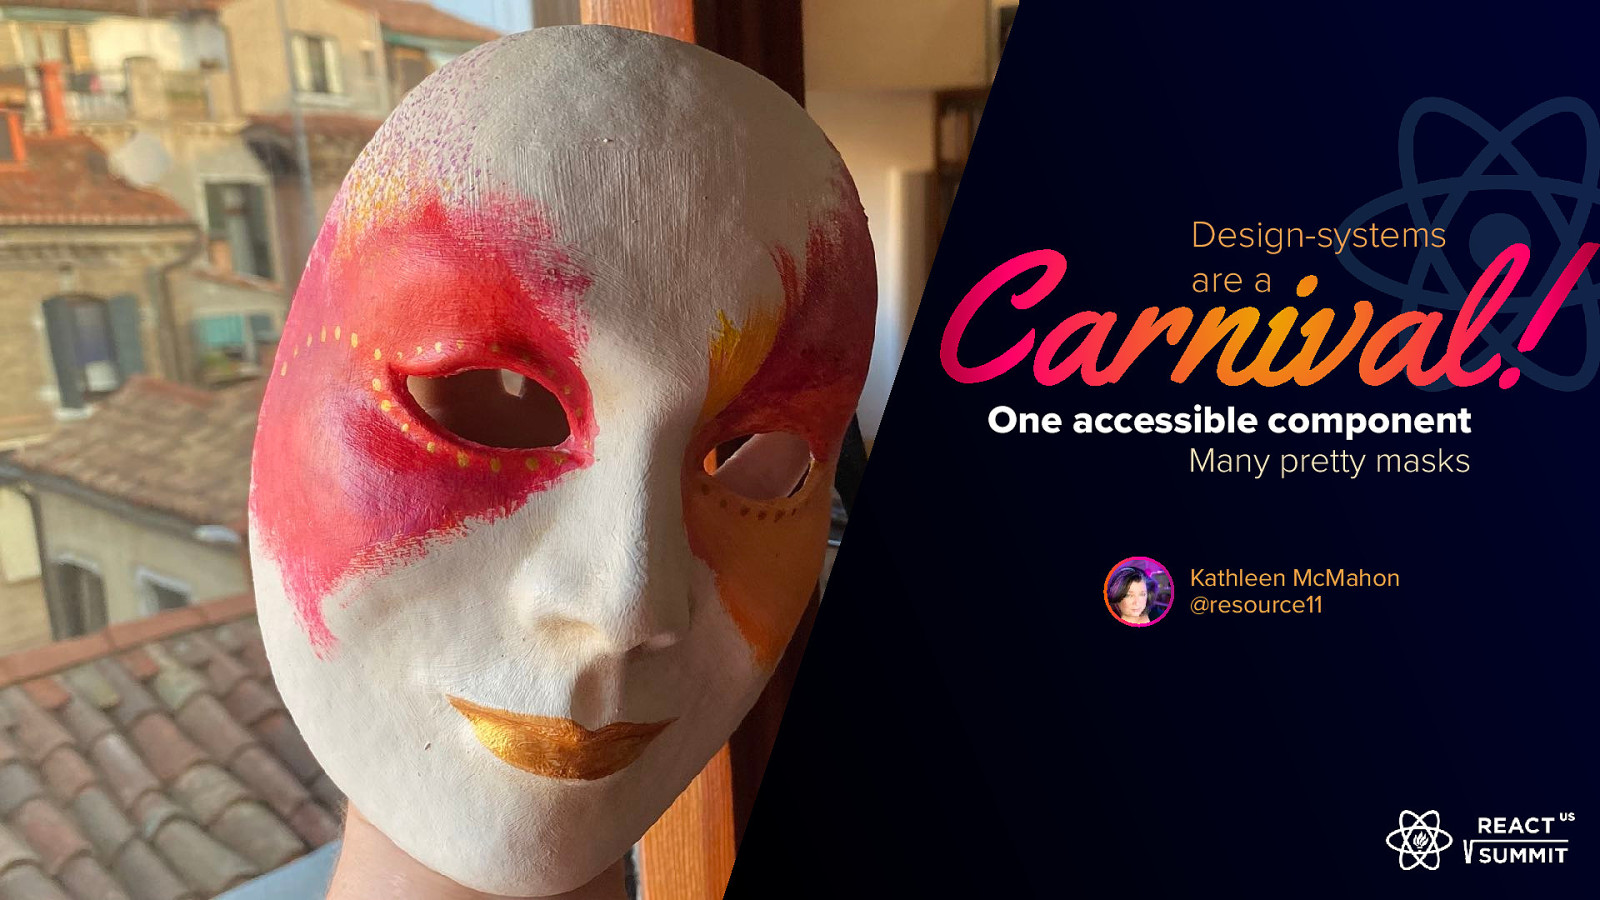  Design-systems are a Carnival! One accessible component Many pretty masks | Kathleen McMahon @resource11